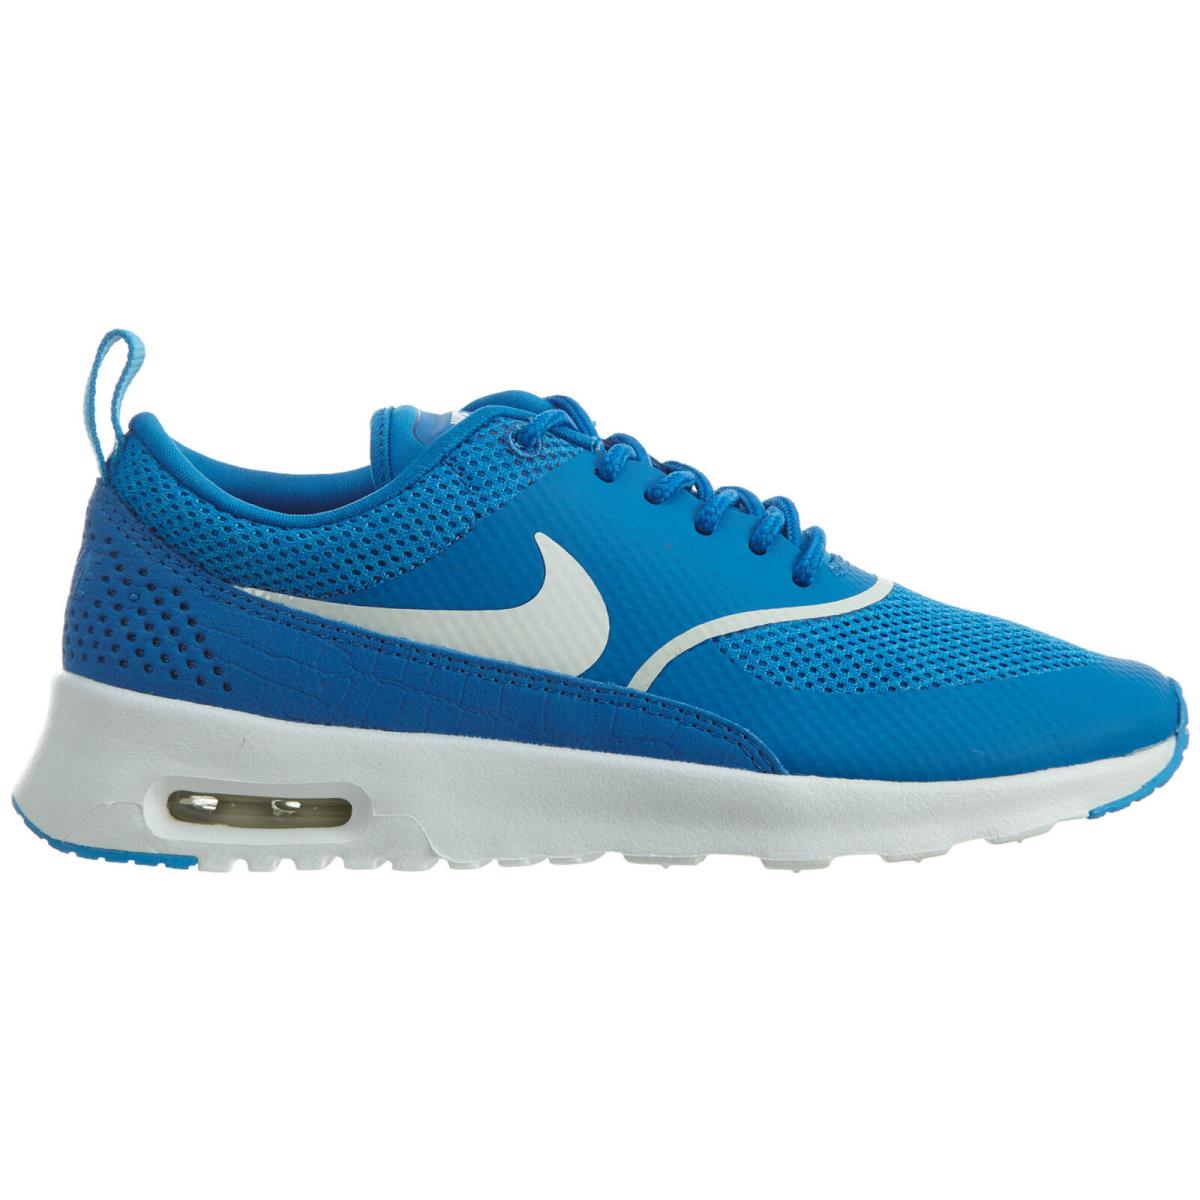 Nike Air Max Thea Womens 599409-413 Blue Spark Glow White Running Shoes Size 6 - Blue Spark/Summit White